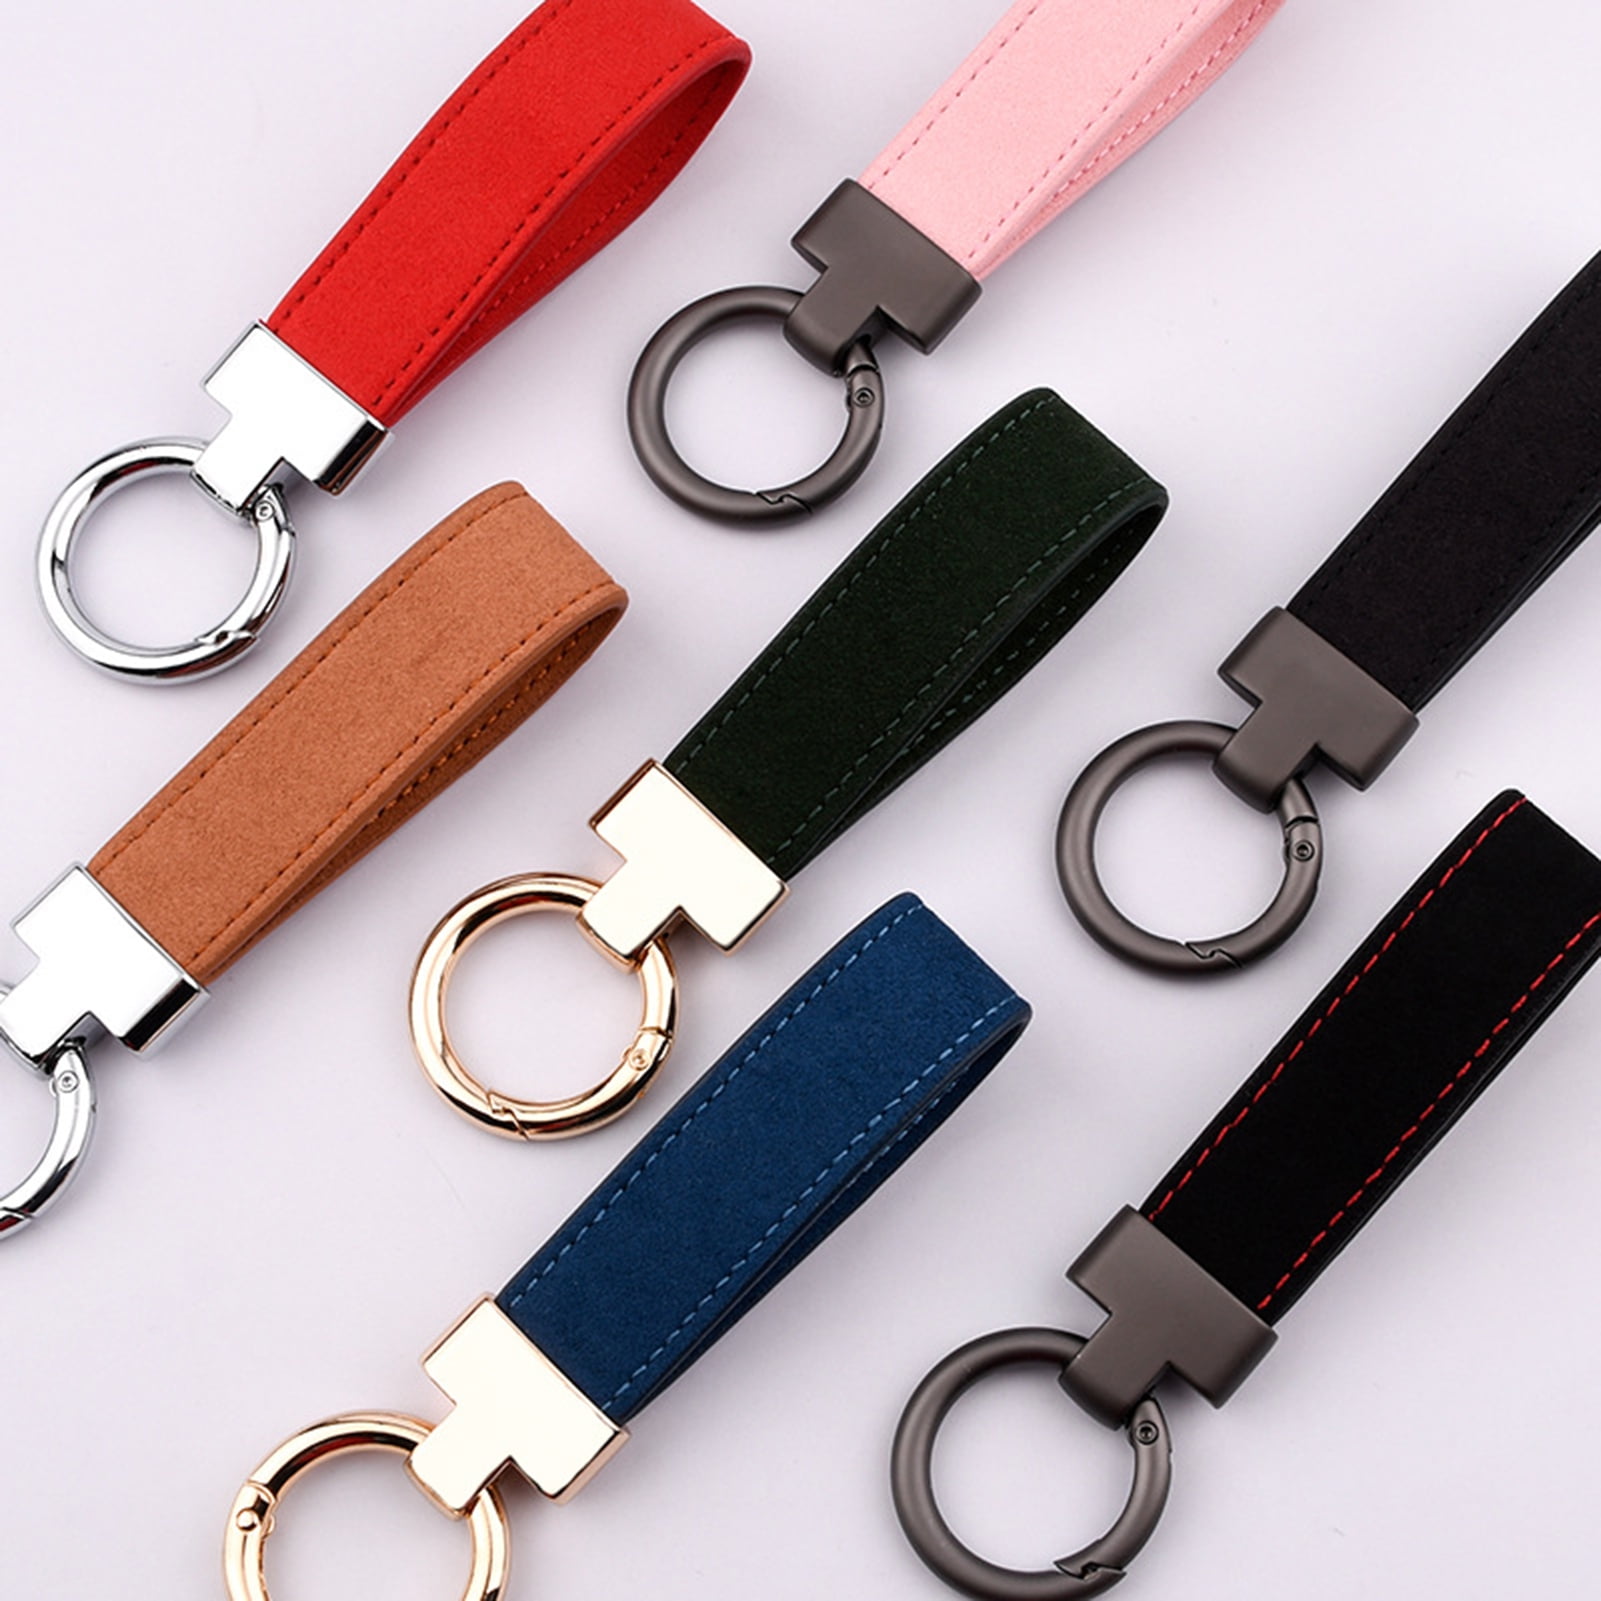 Liangery Keychain for Men Women Leather Car Key Chain with 5 Key Rings-Drive Safely Have Fun Keychain Holder for Keys